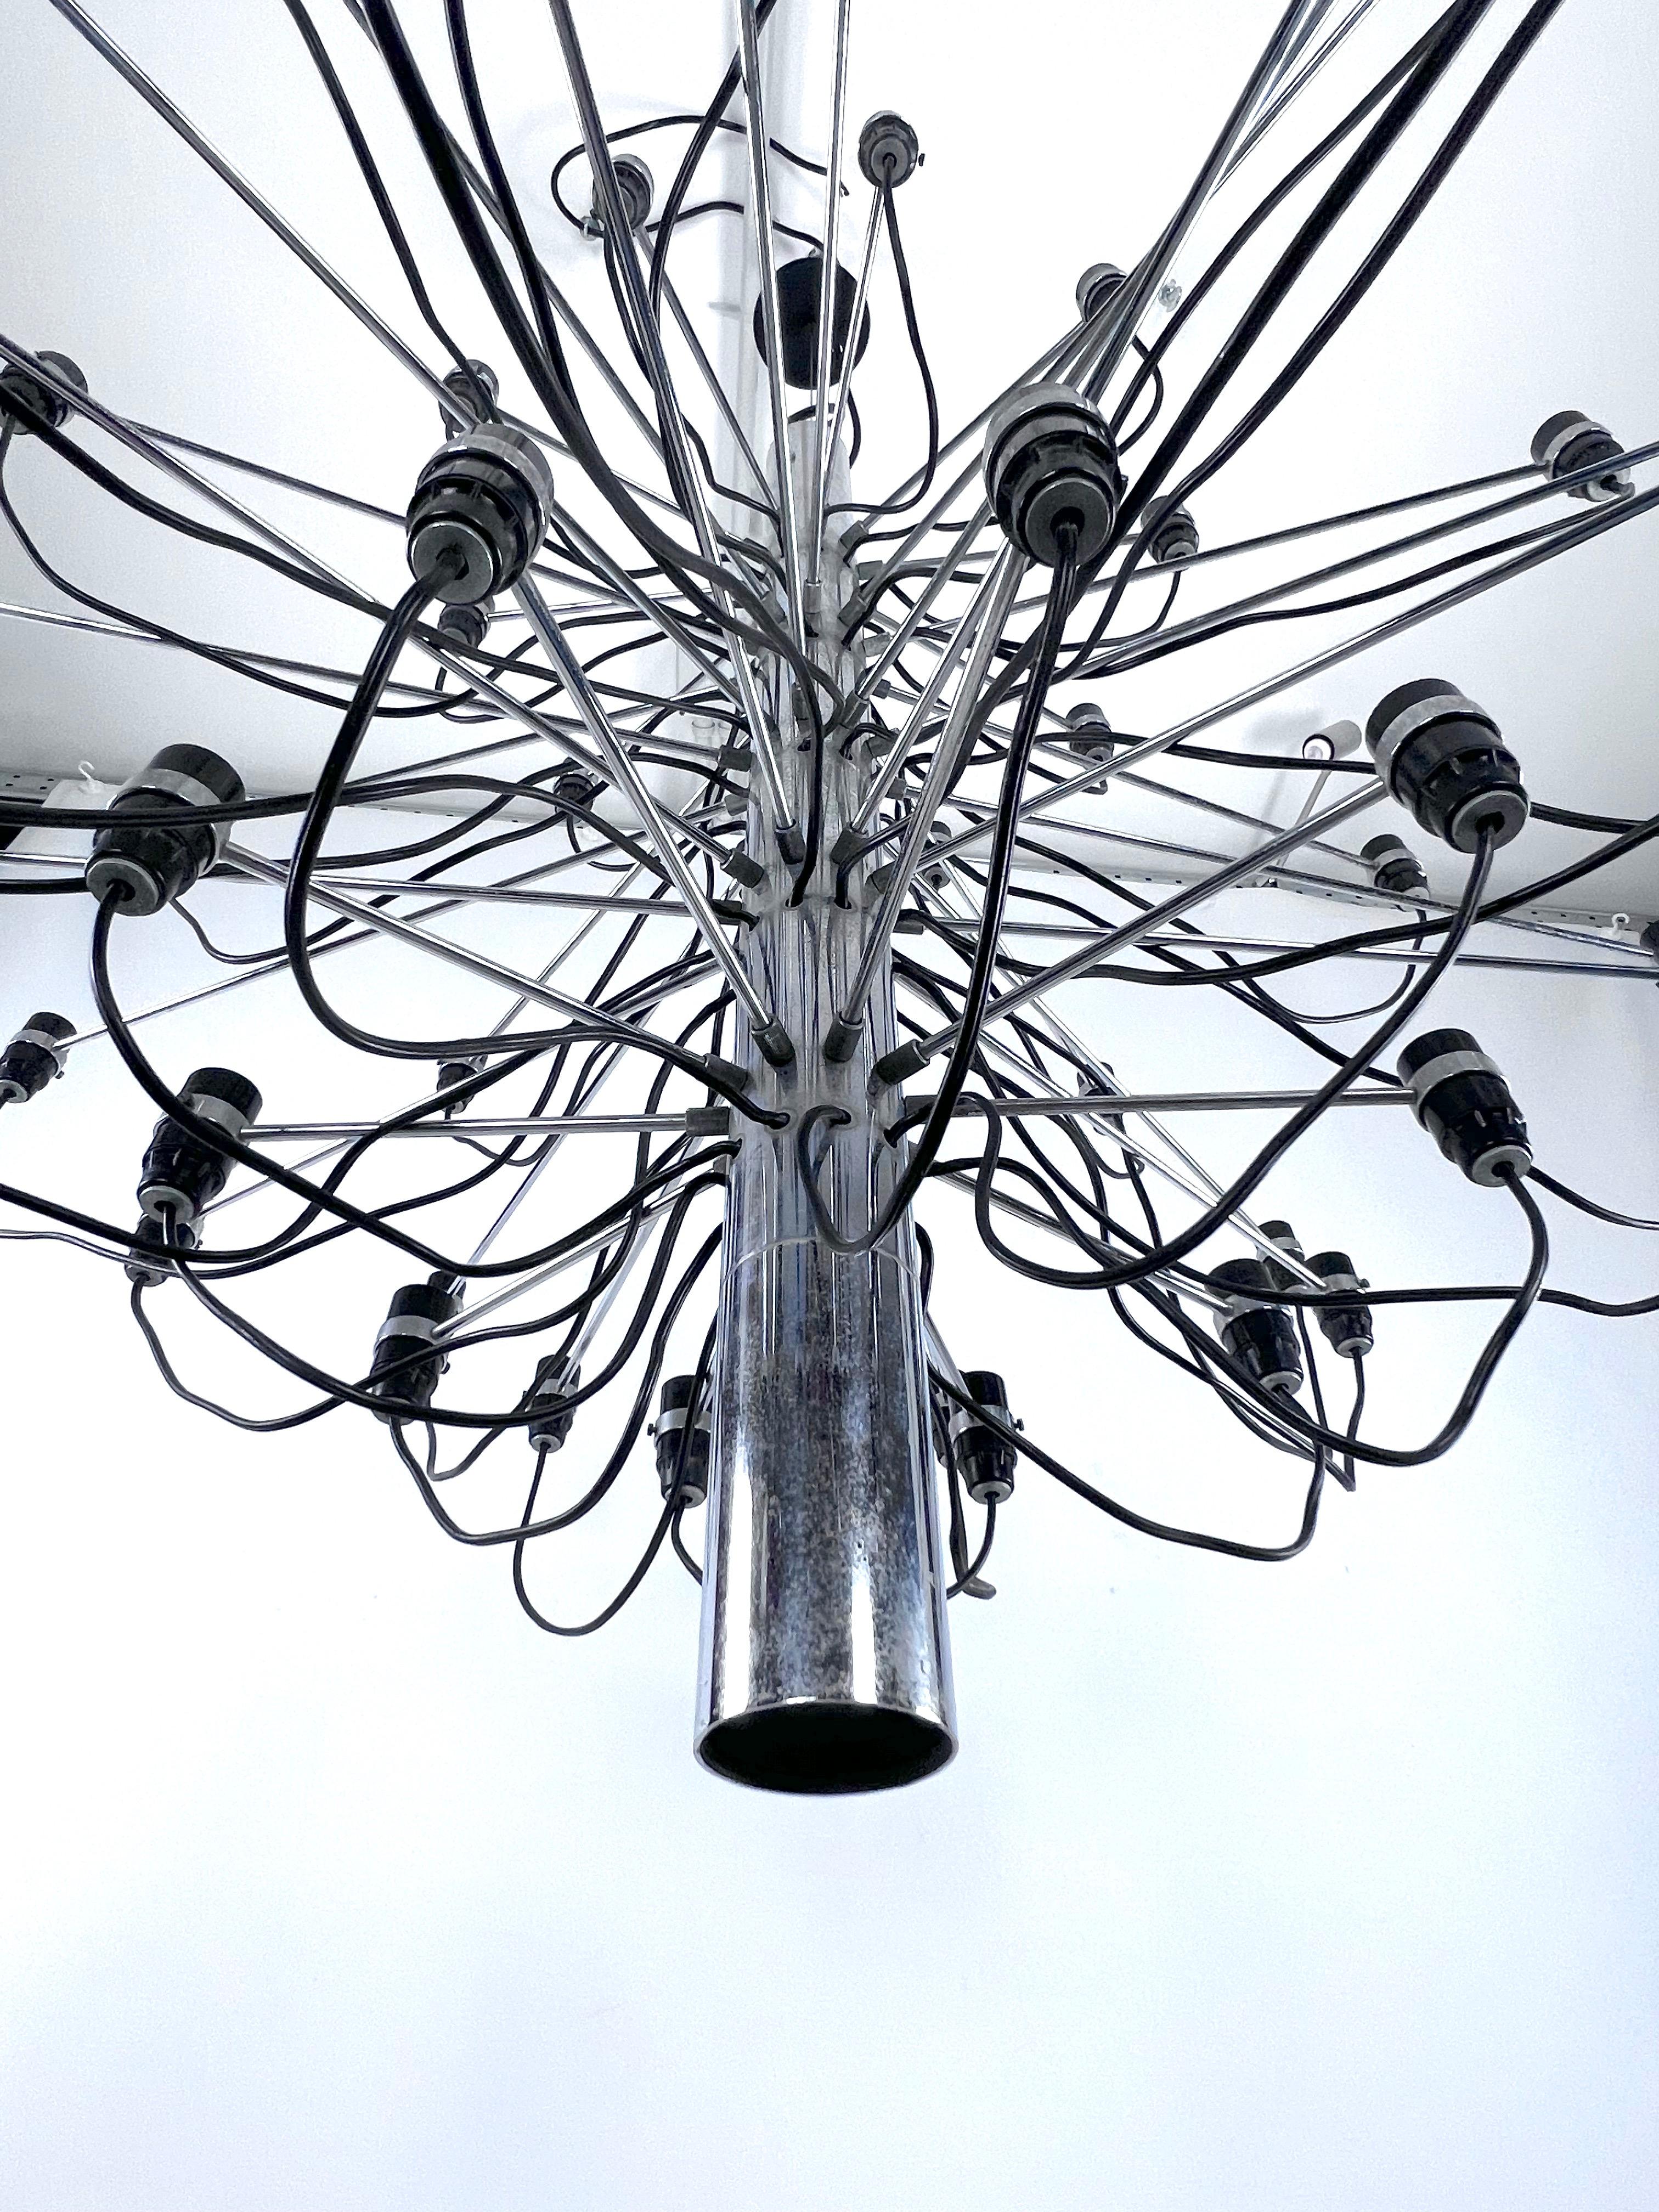 Mid-Century Modern early serie of Arteluce chandelier model 2097 with 50 lights. Designed by Gino Sarfatti in 1958 and produced in Italy. Labeled with the Arteluce early sticker from 50s.

Good original vintage condition with no damages but normal